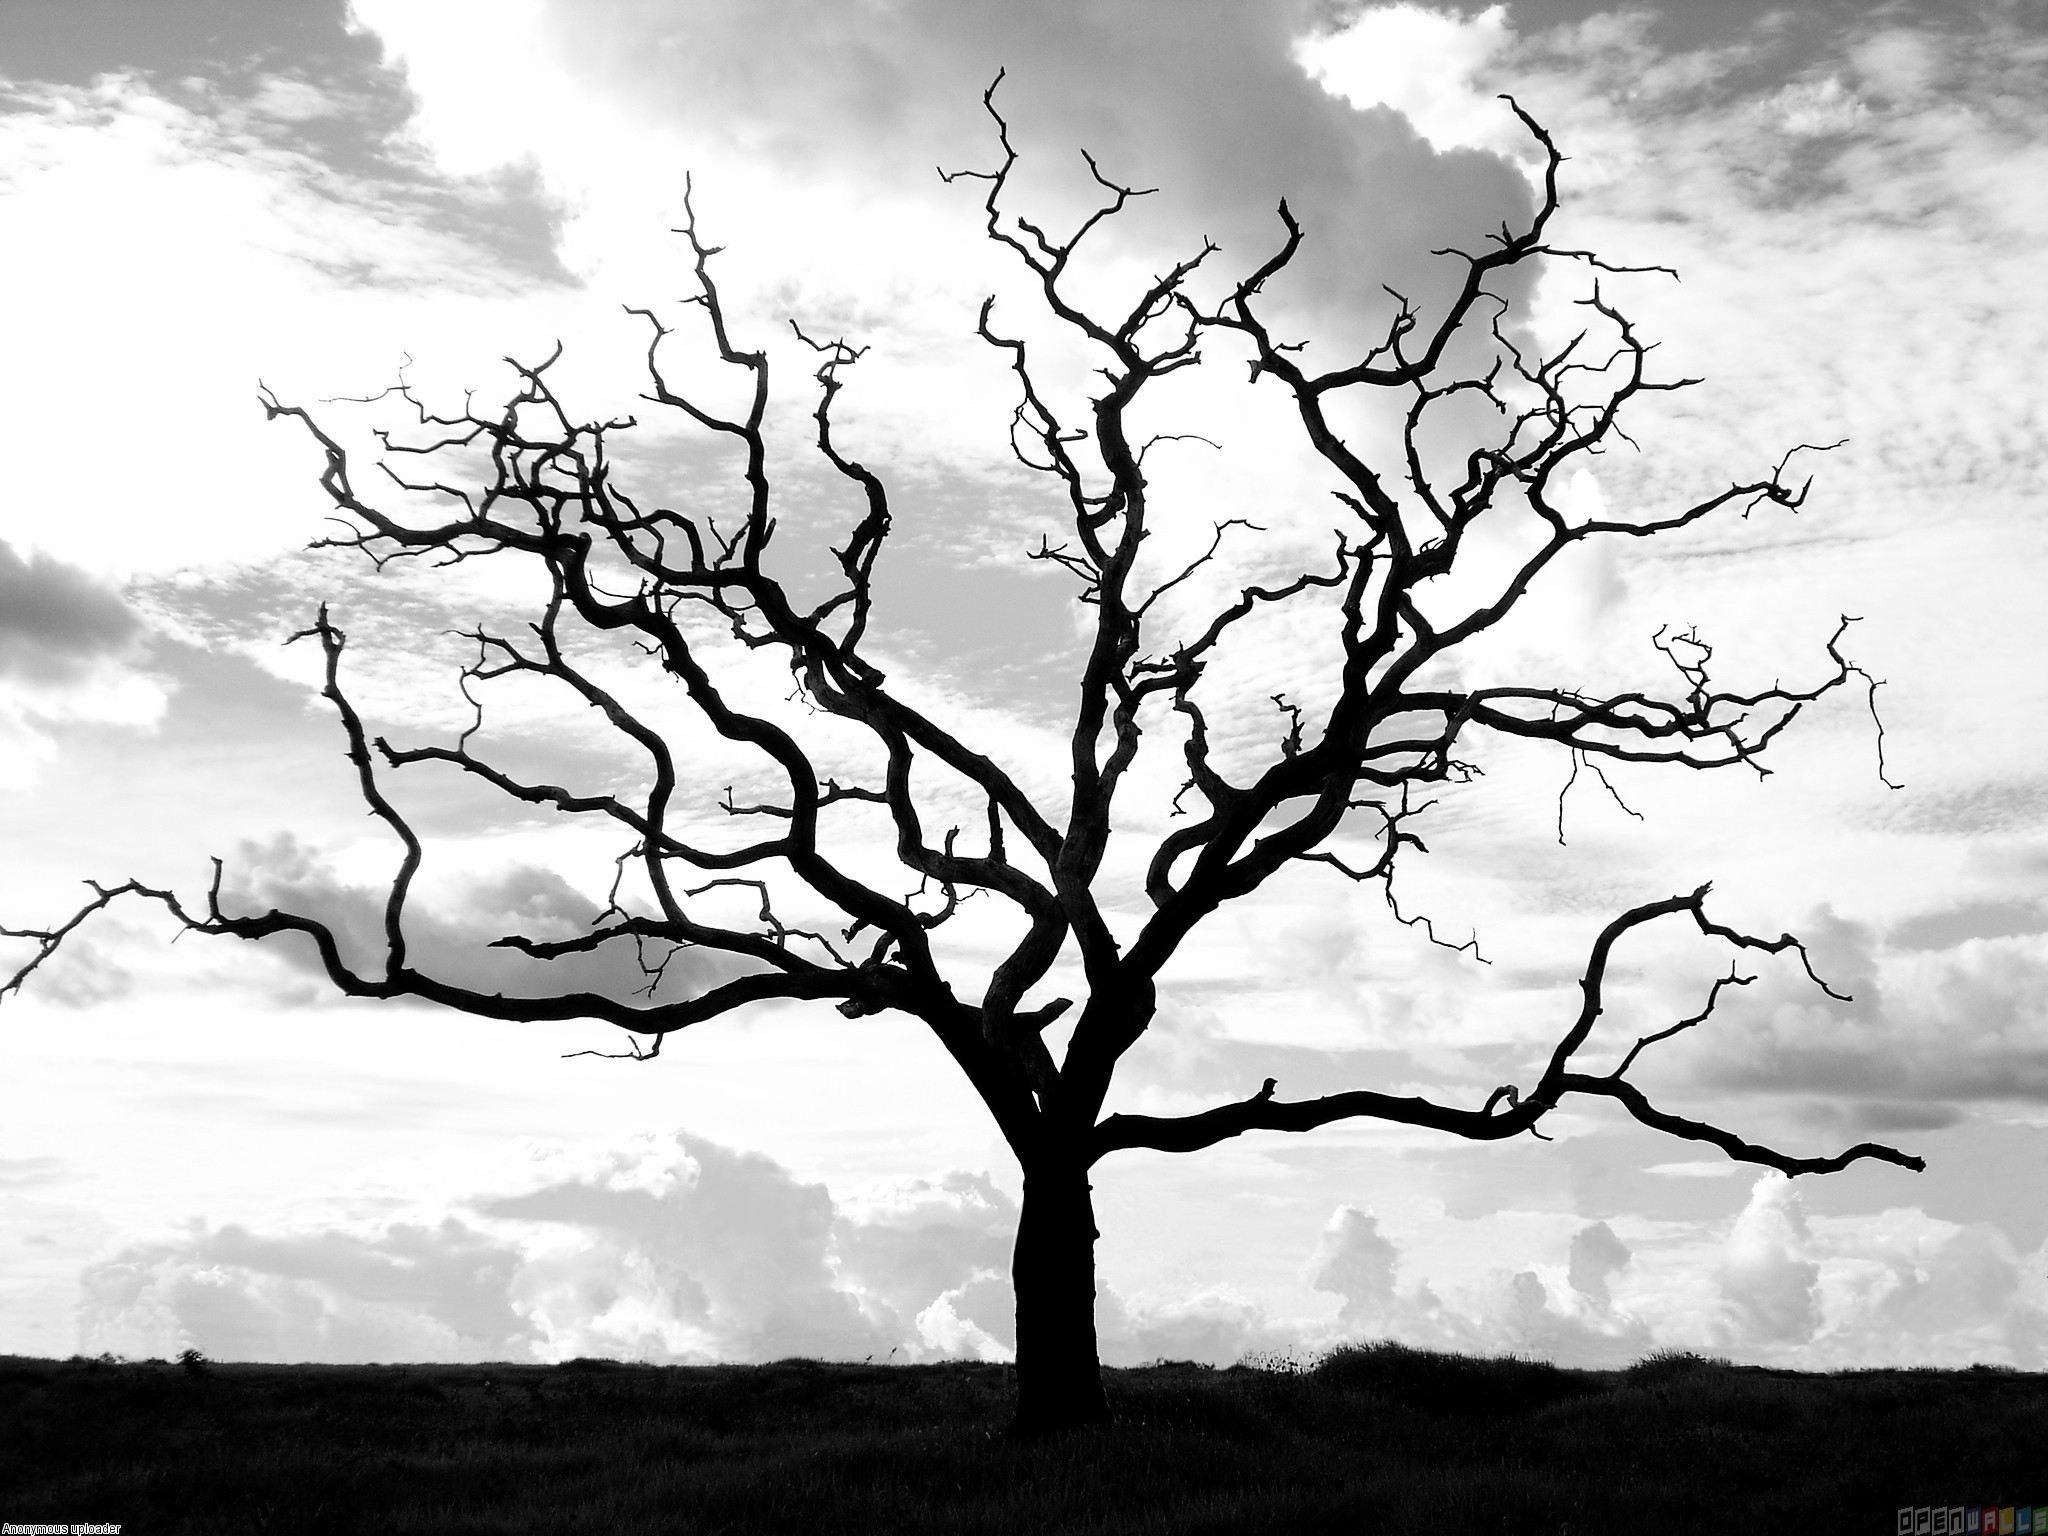 Dry Tree Drawing at GetDrawings.com | Free for personal use Dry Tree ...